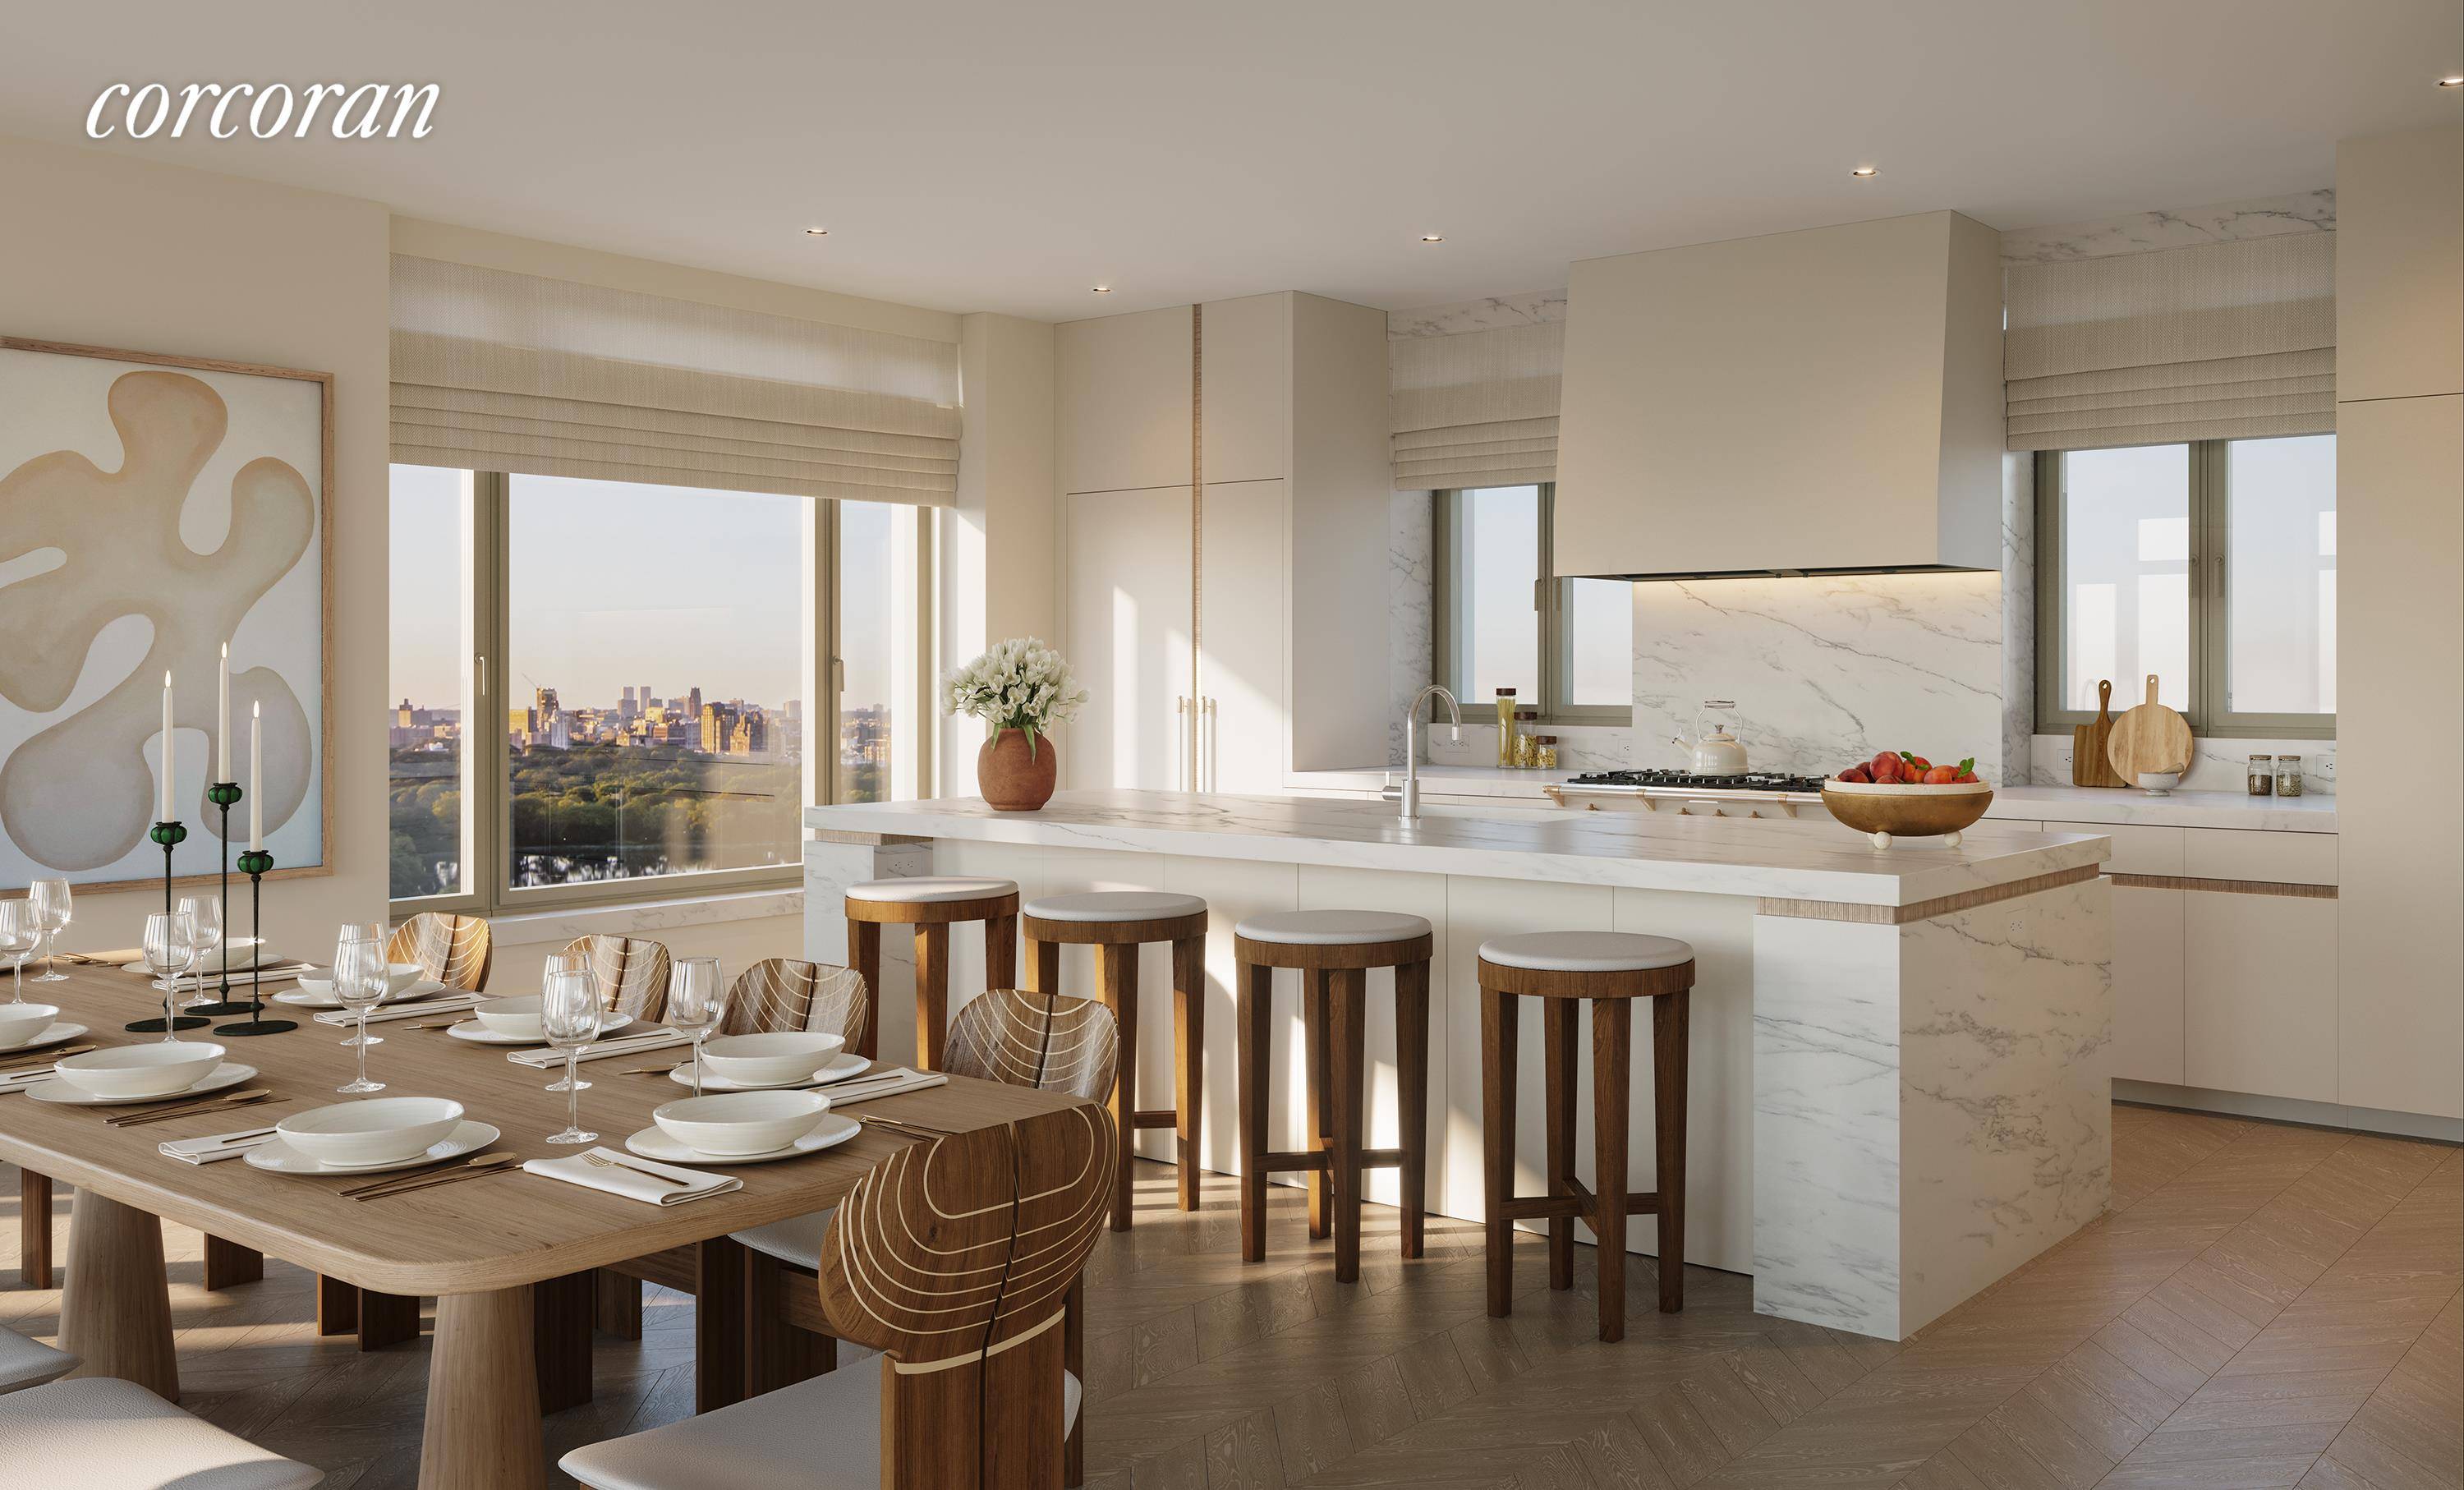 The Eleventh Floor at 1228 Madison Avenue is a 4 bedroom 4.